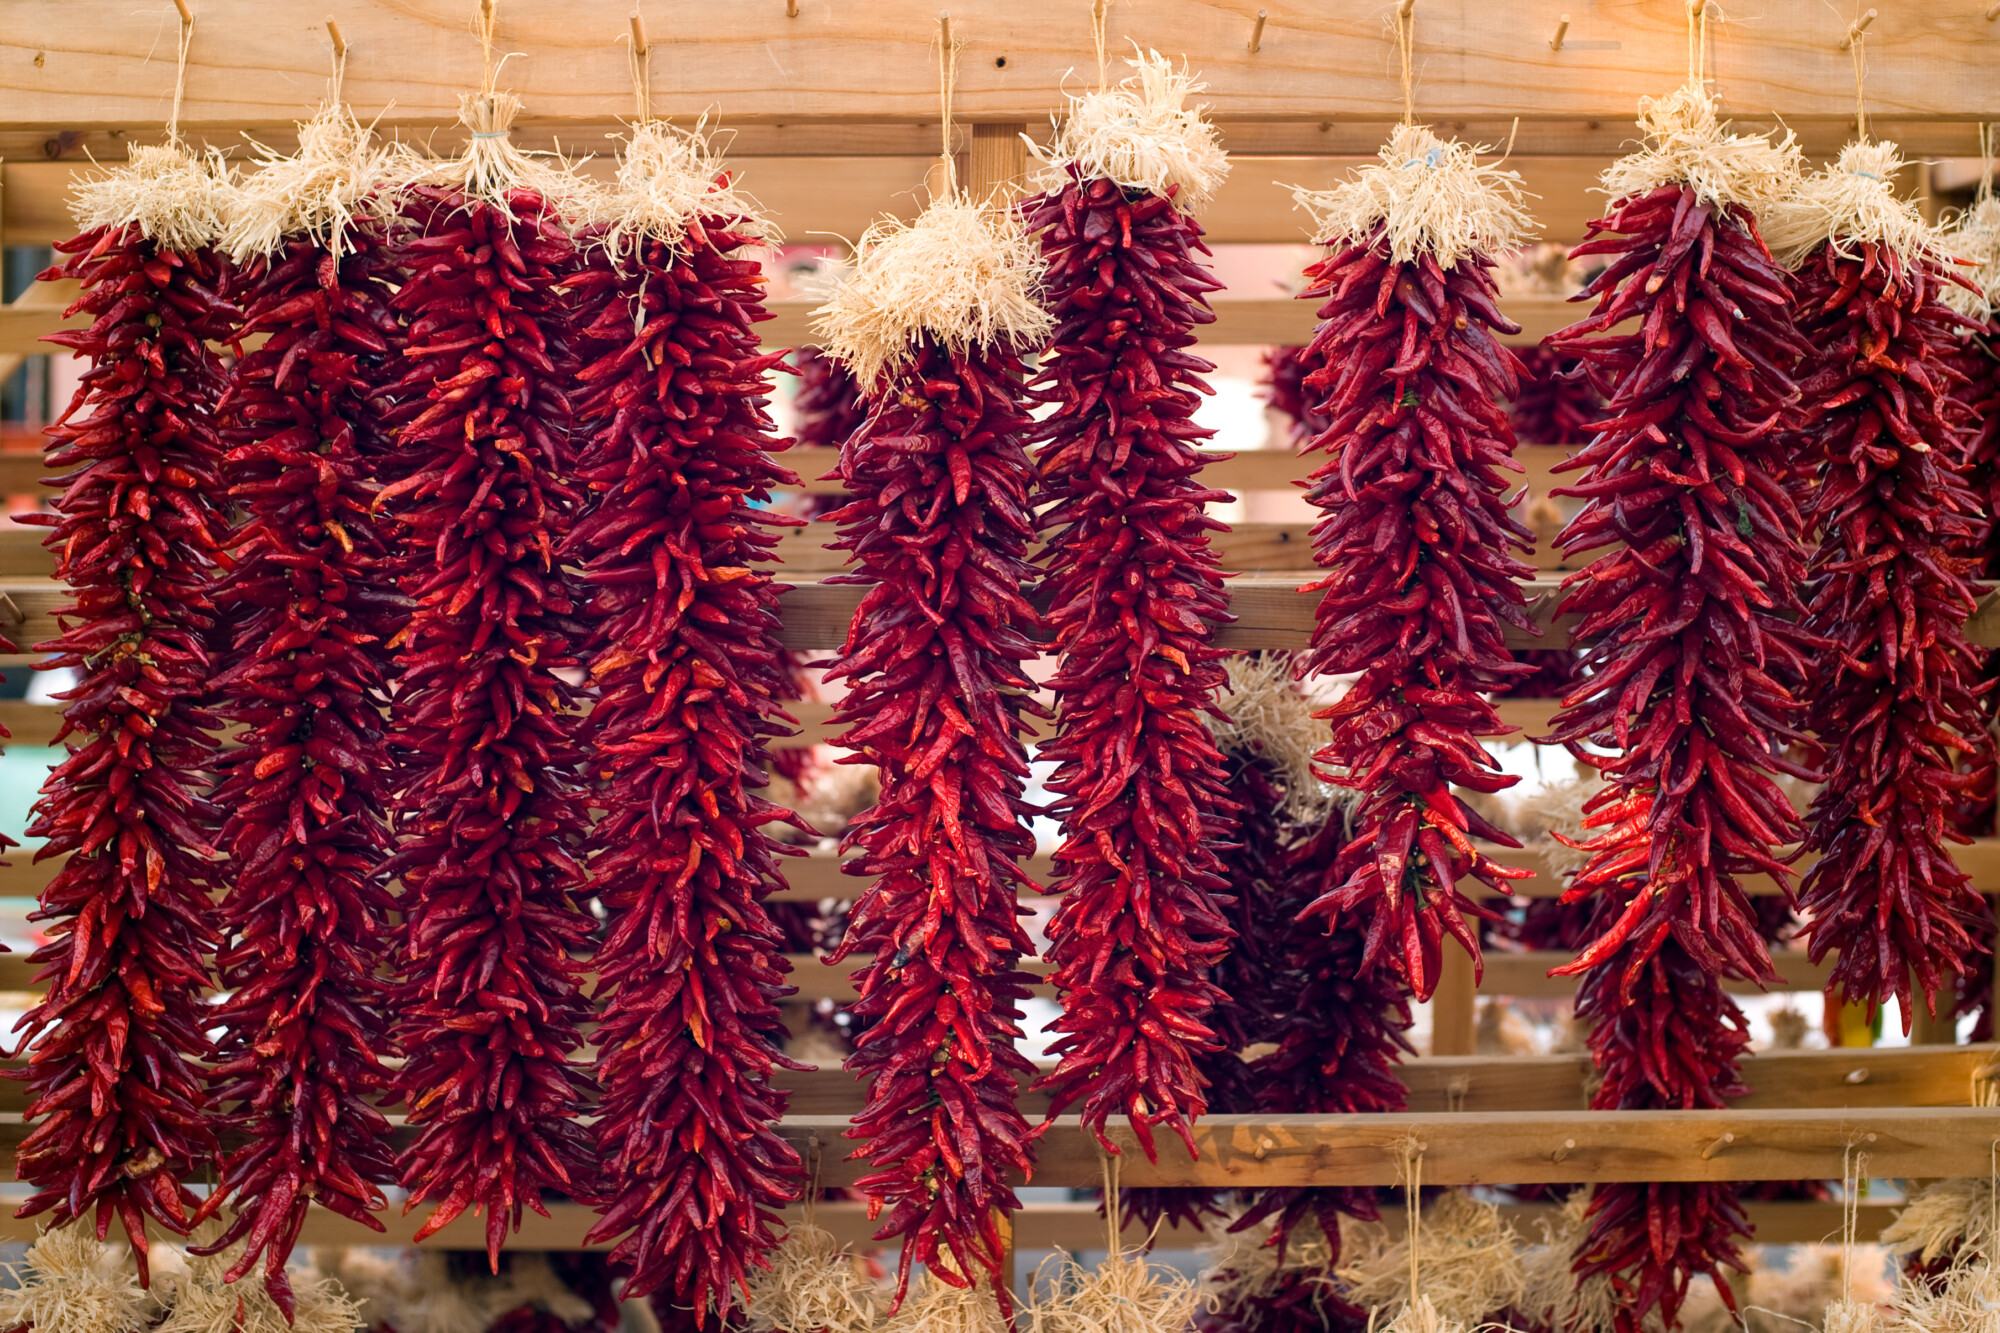 Chili peppers hanging on Santa Fe marketplace, New Mexico